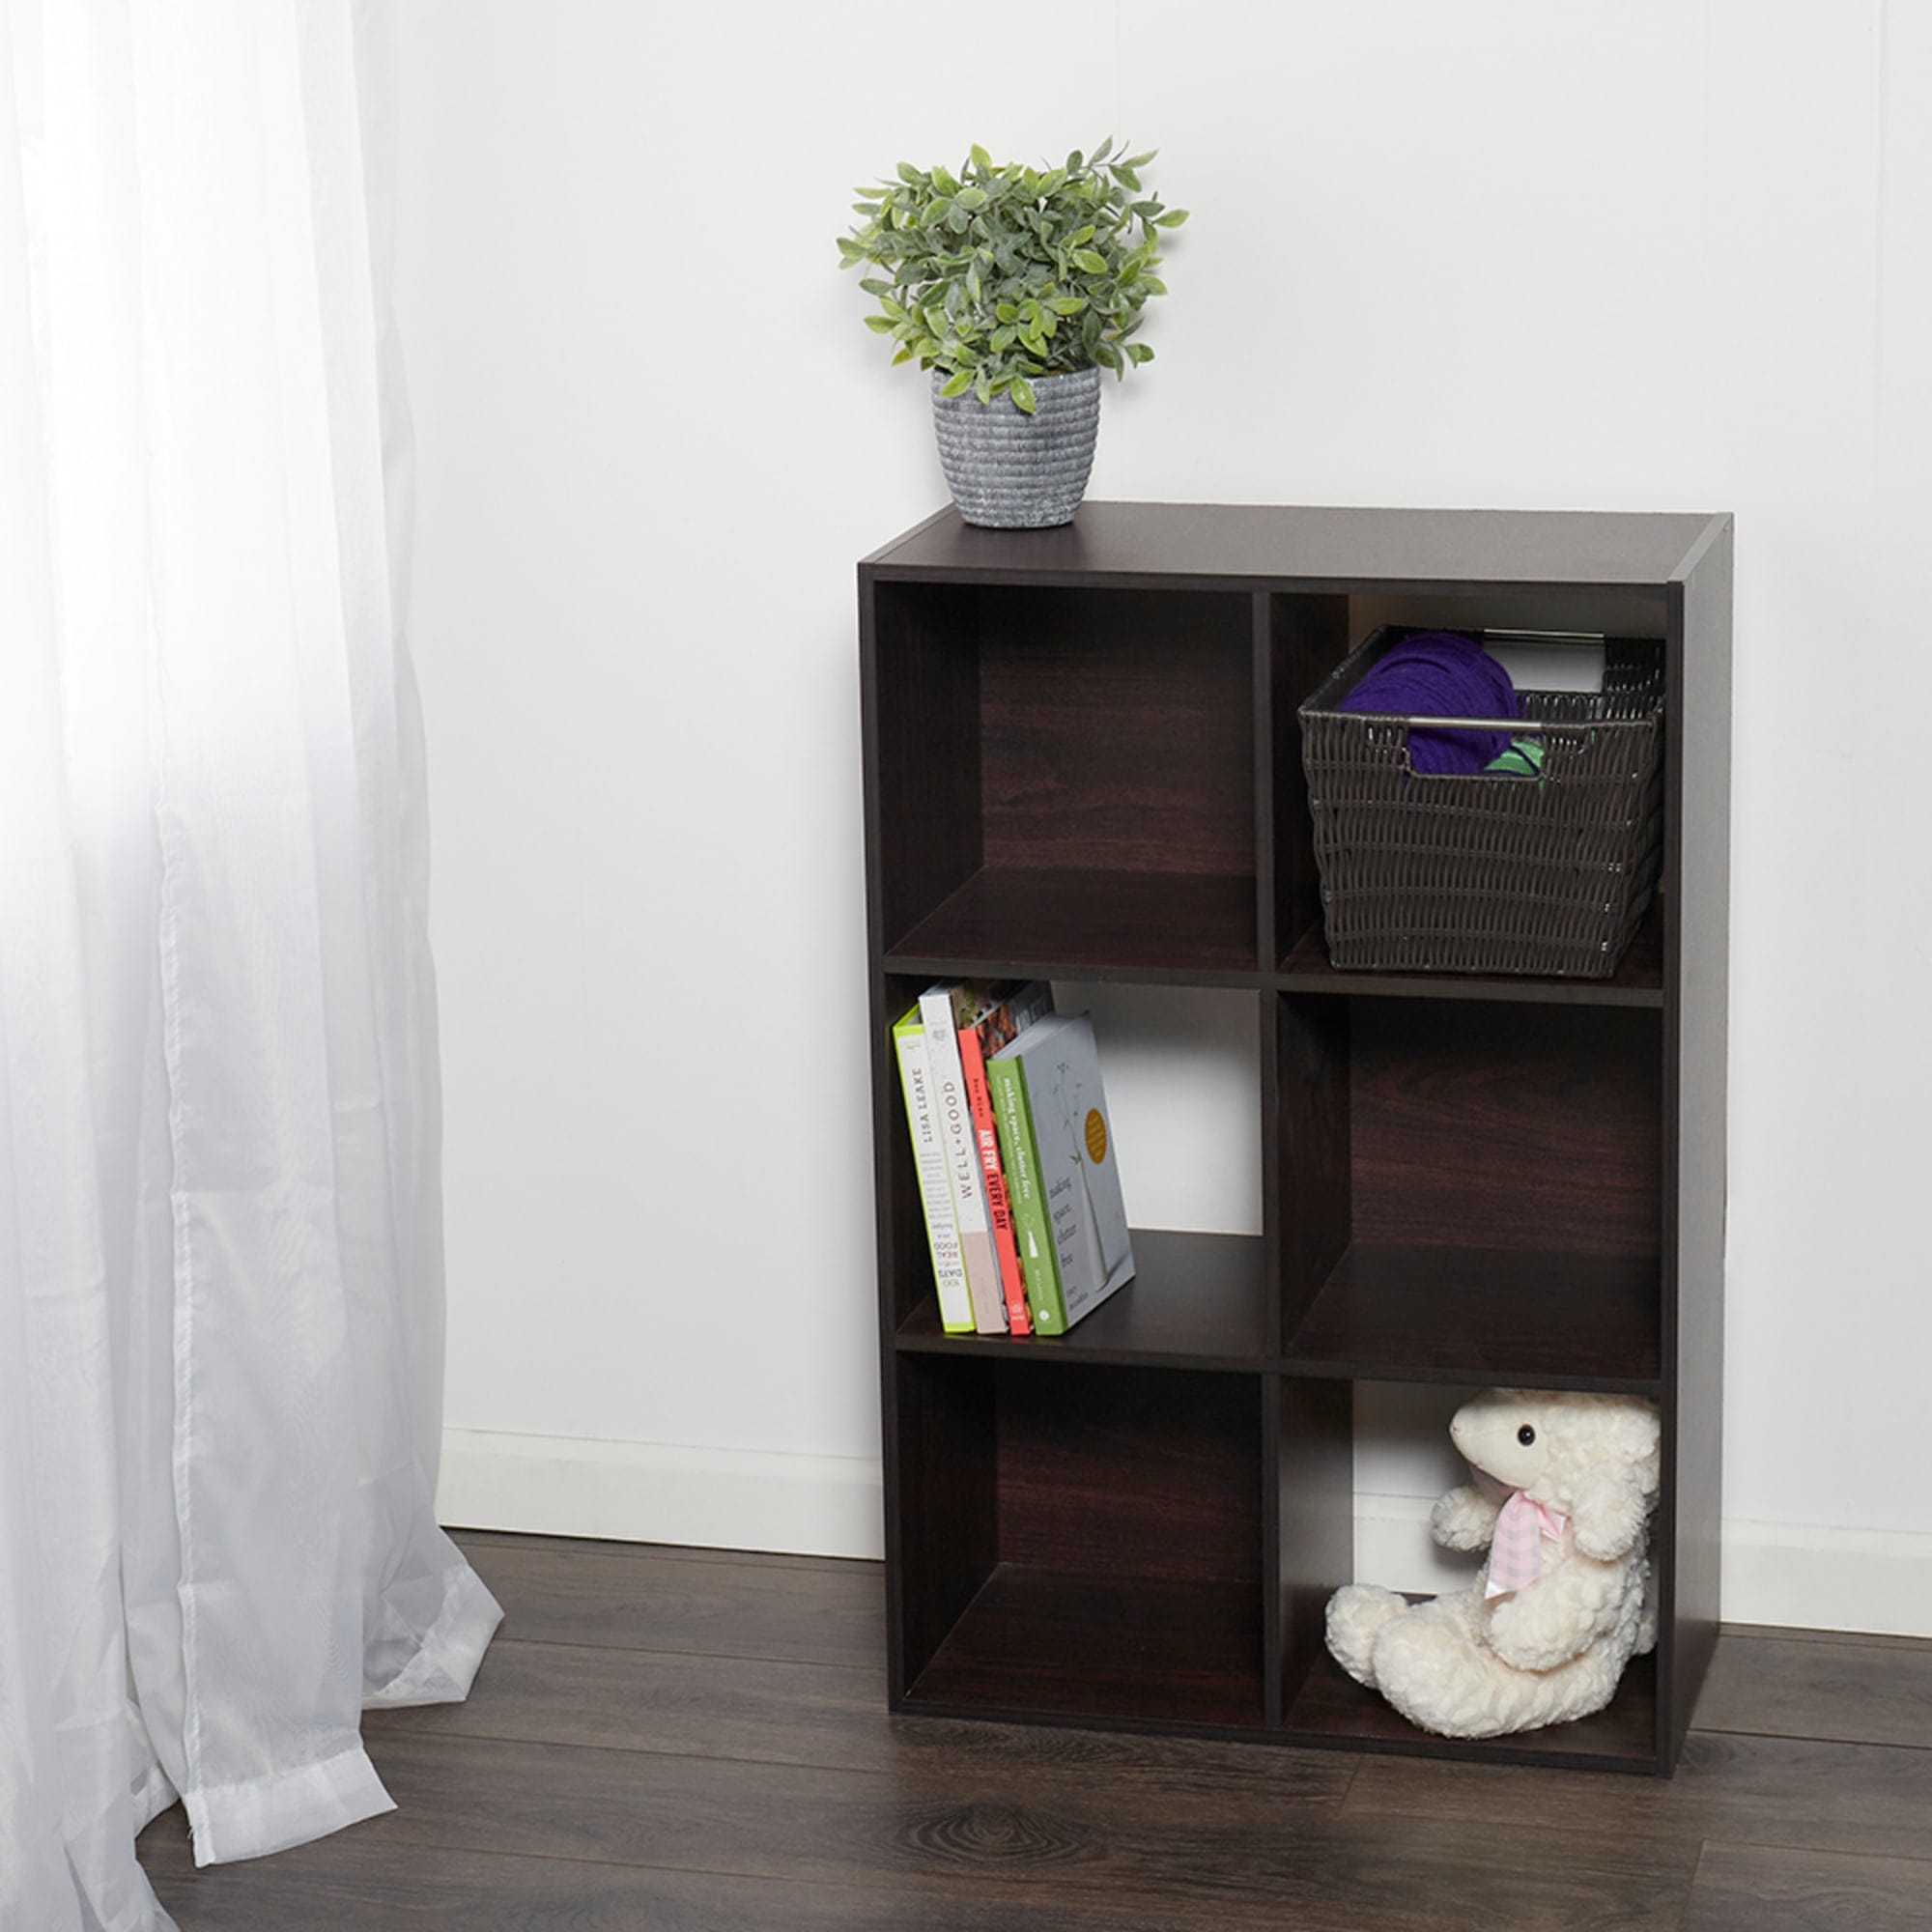 Home Basics Open and Enclosed 6 Cube MDF Storage Organizer, Espresso $40.00 EACH, CASE PACK OF 1